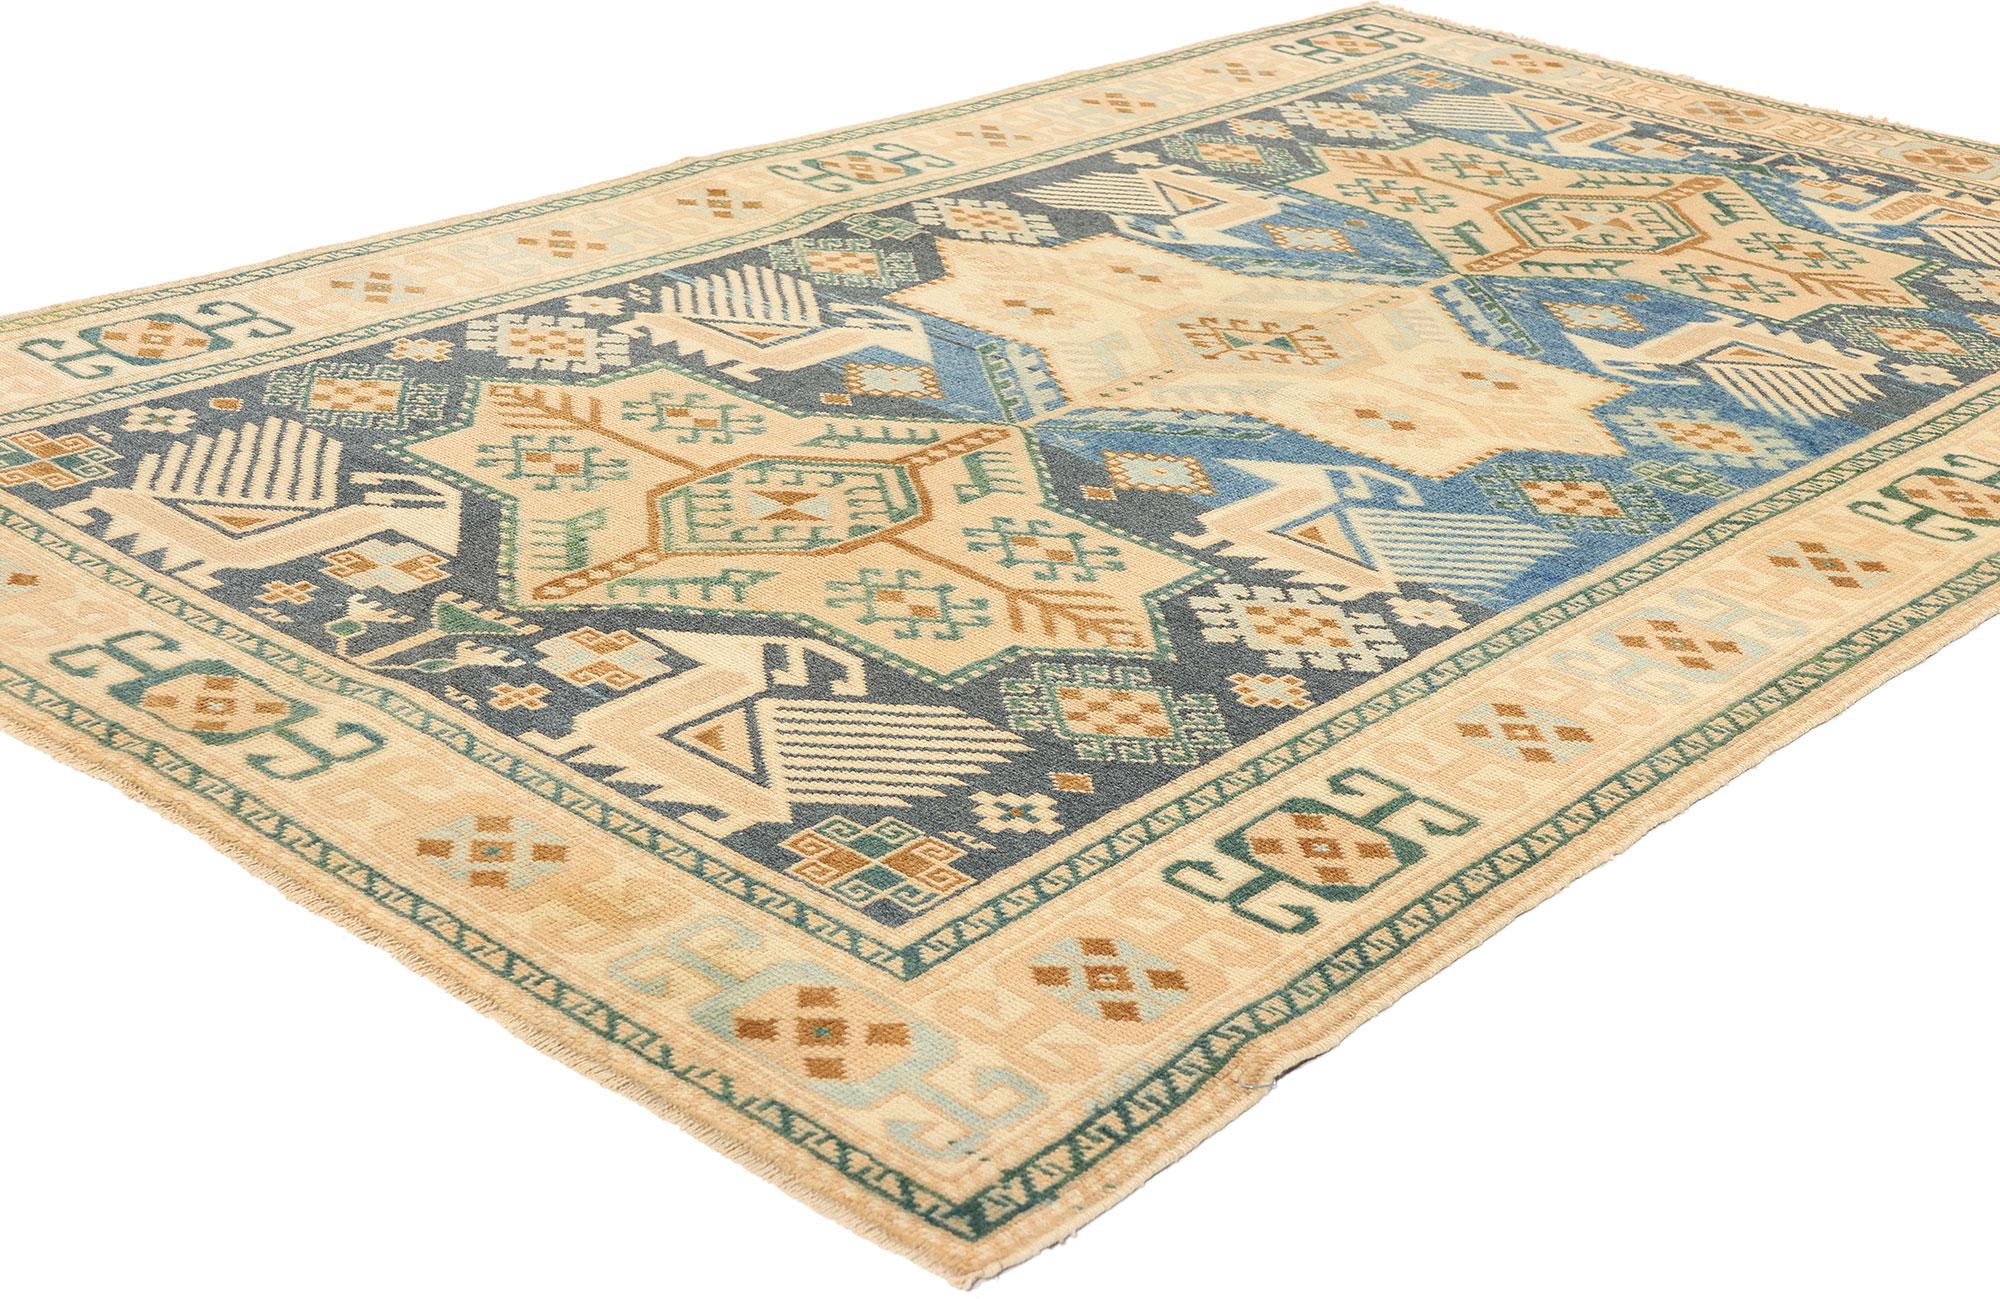 53702 Vintage Blue Turkish Oushak Rug, 04'04 x 07'03. Originating in Turkey's Oushak region, muted antique-washed Turkish Oushak rugs are renowned for their exquisite handwoven craftsmanship, boasting soft colors and subtle patterns that seamlessly